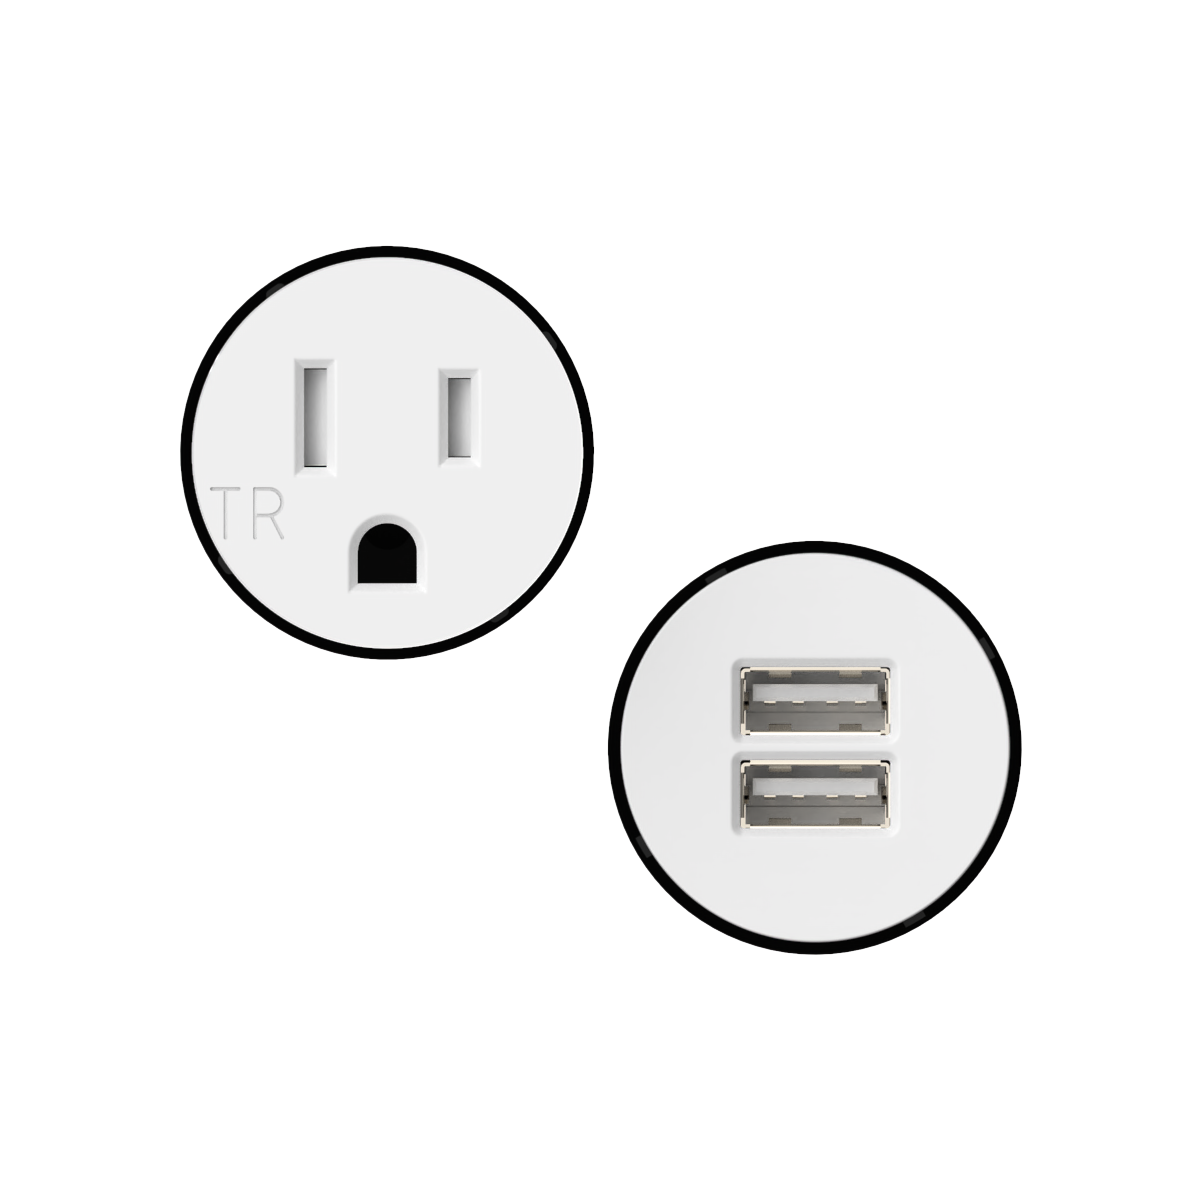 Double Outlet-USB-A Kit